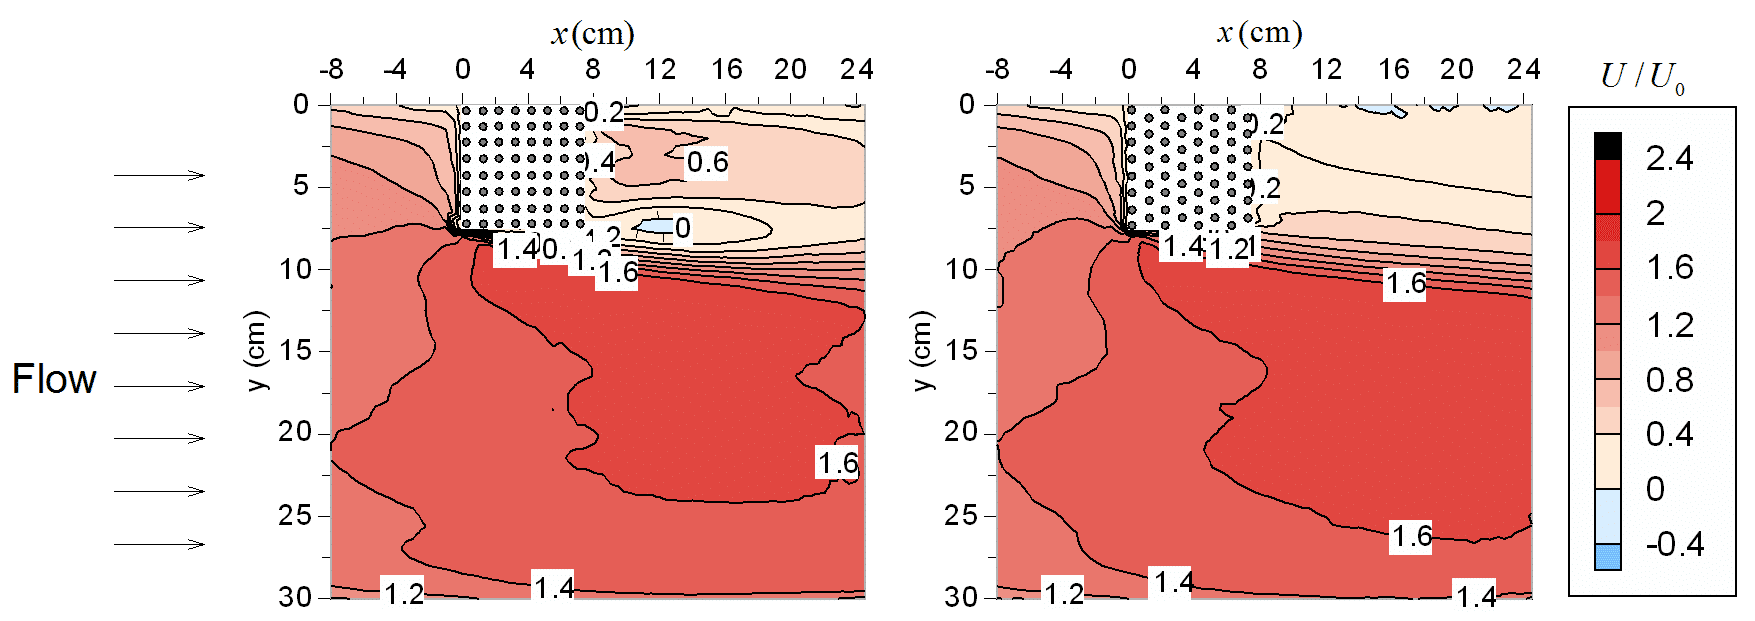 Figure 1: Contours of longitudinal velocity distribution normalized by the mean velocity, case 8x8_in-line (left), and case 8x8_staggered (right).